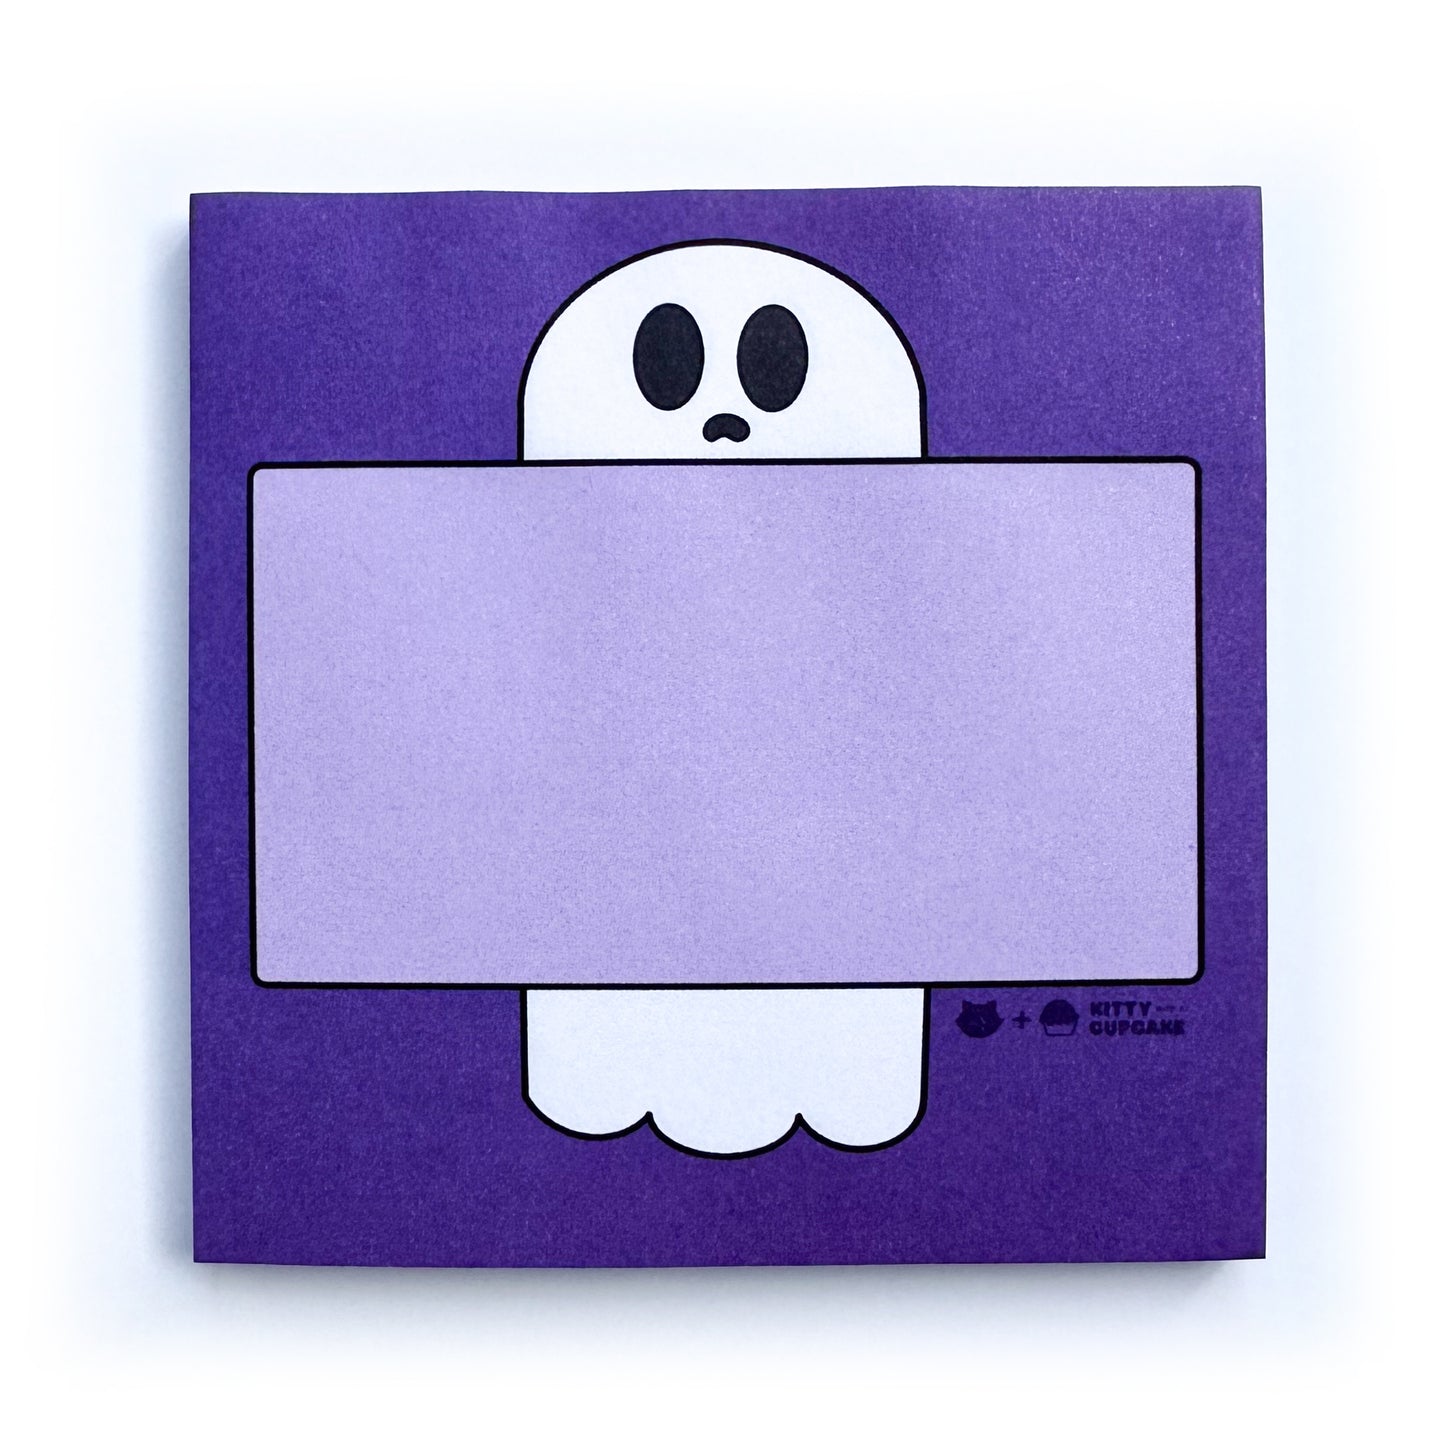 A purple square pad of sticky notes featuring a ghost holding a light purple box to write in.